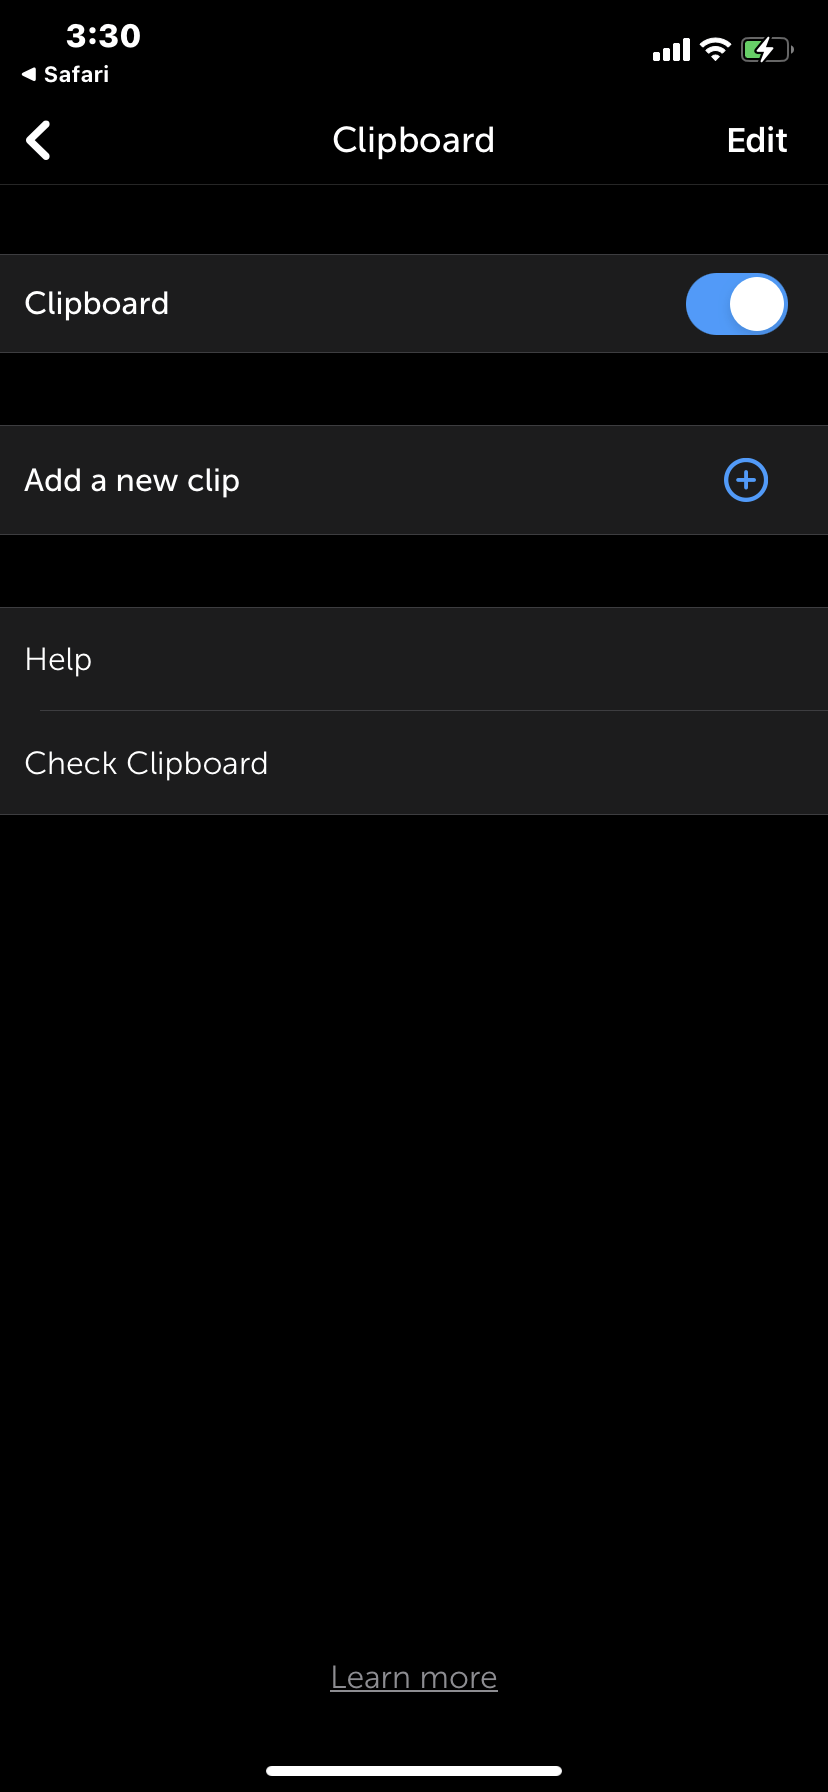 How to Check Clipboard History on iPhone? DigitBin